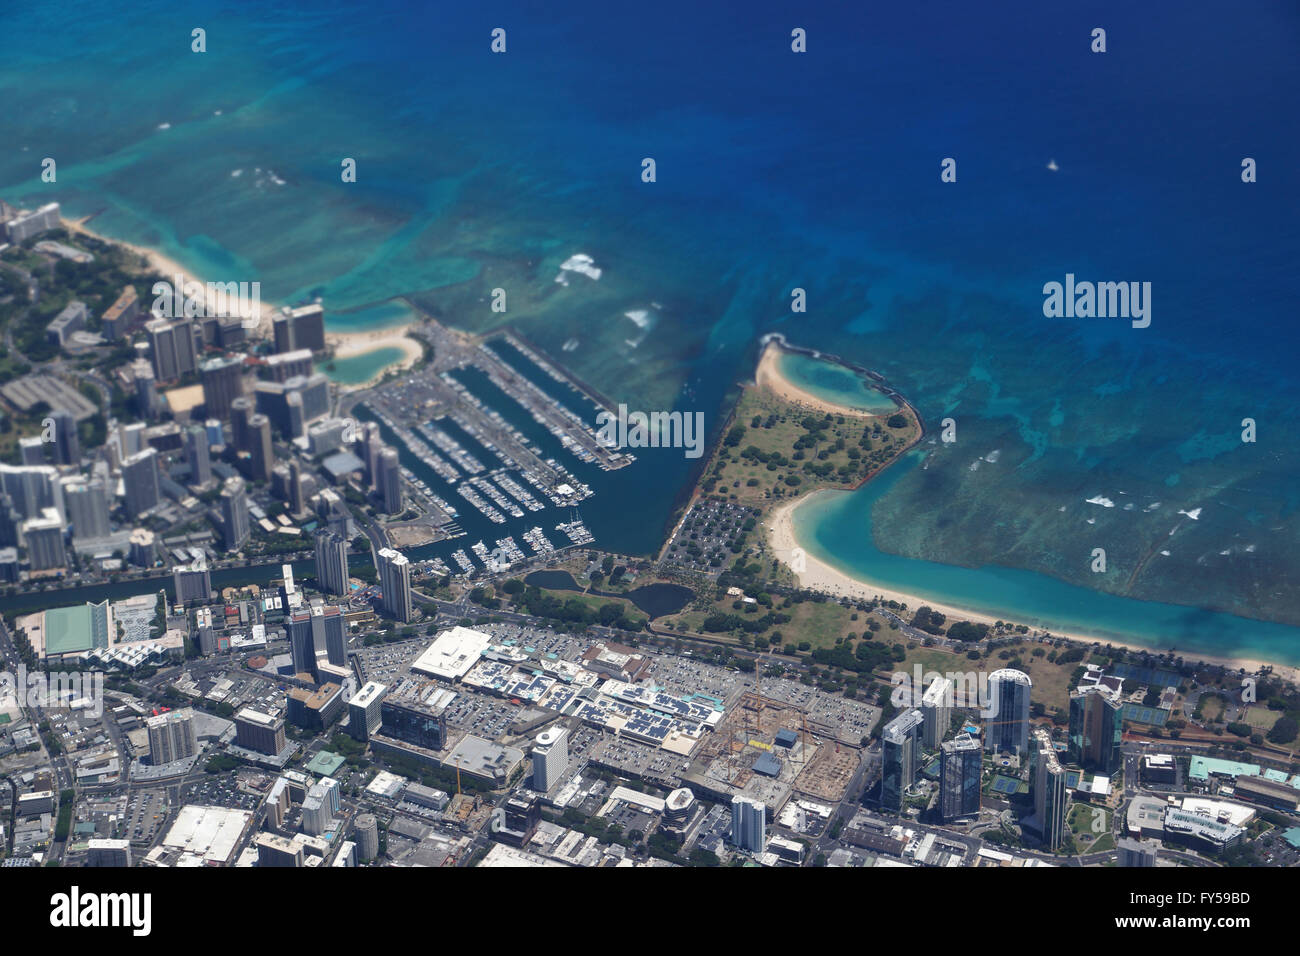 Waikiki, Ala Wai Canal, Ala Moana Mall, Park, Convention Center, Condos, Hotels of Honolulu and Ocean Aerial view during the day Stock Photo